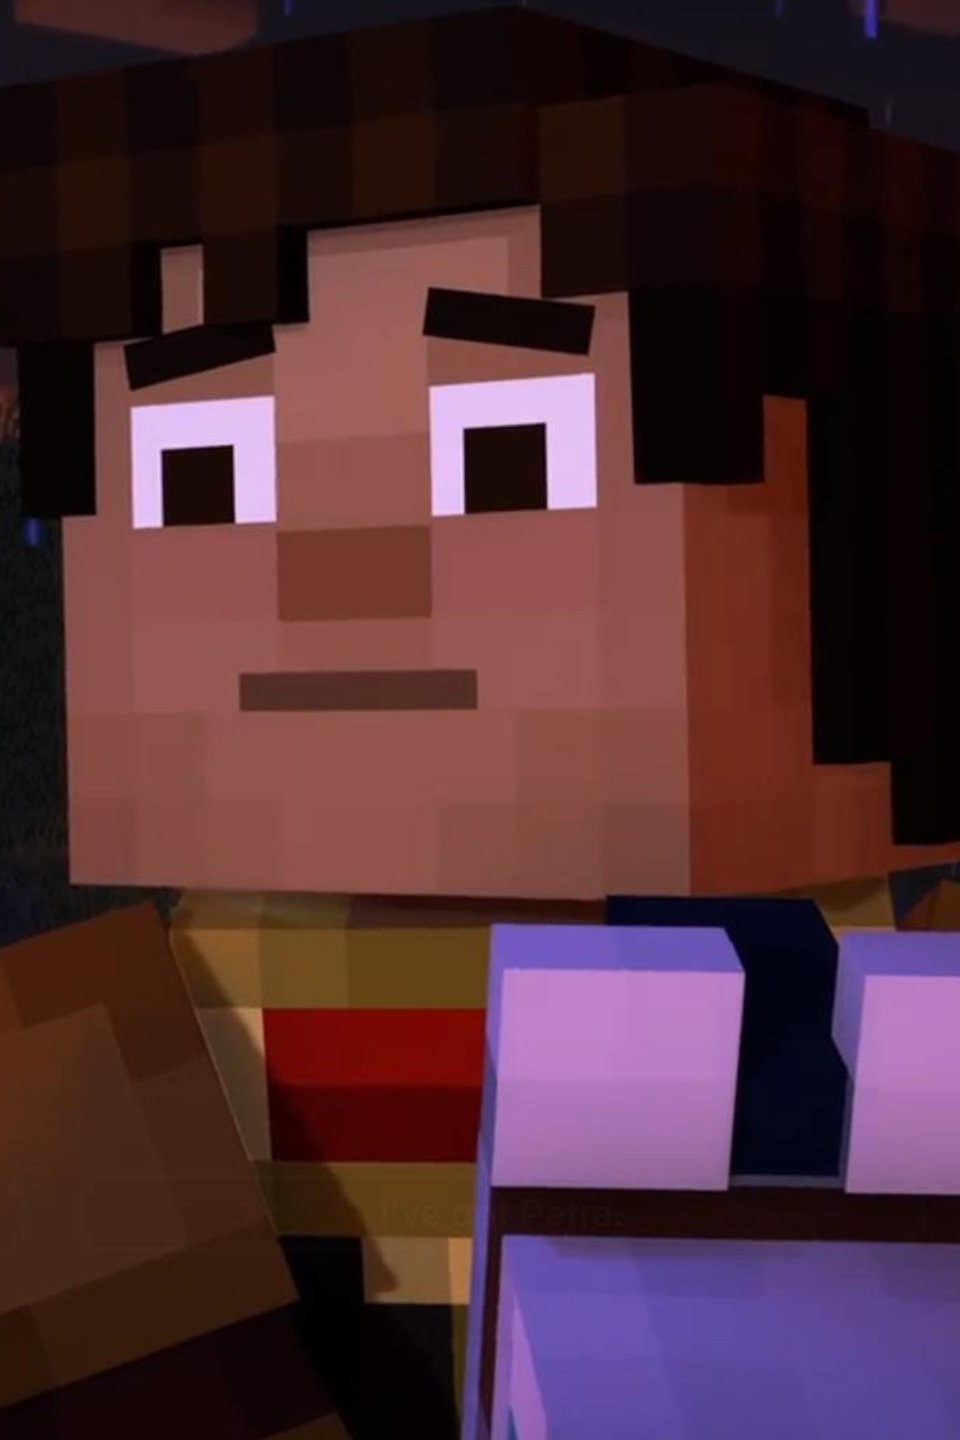 Minecraft: Story Mode - Rotten Tomatoes